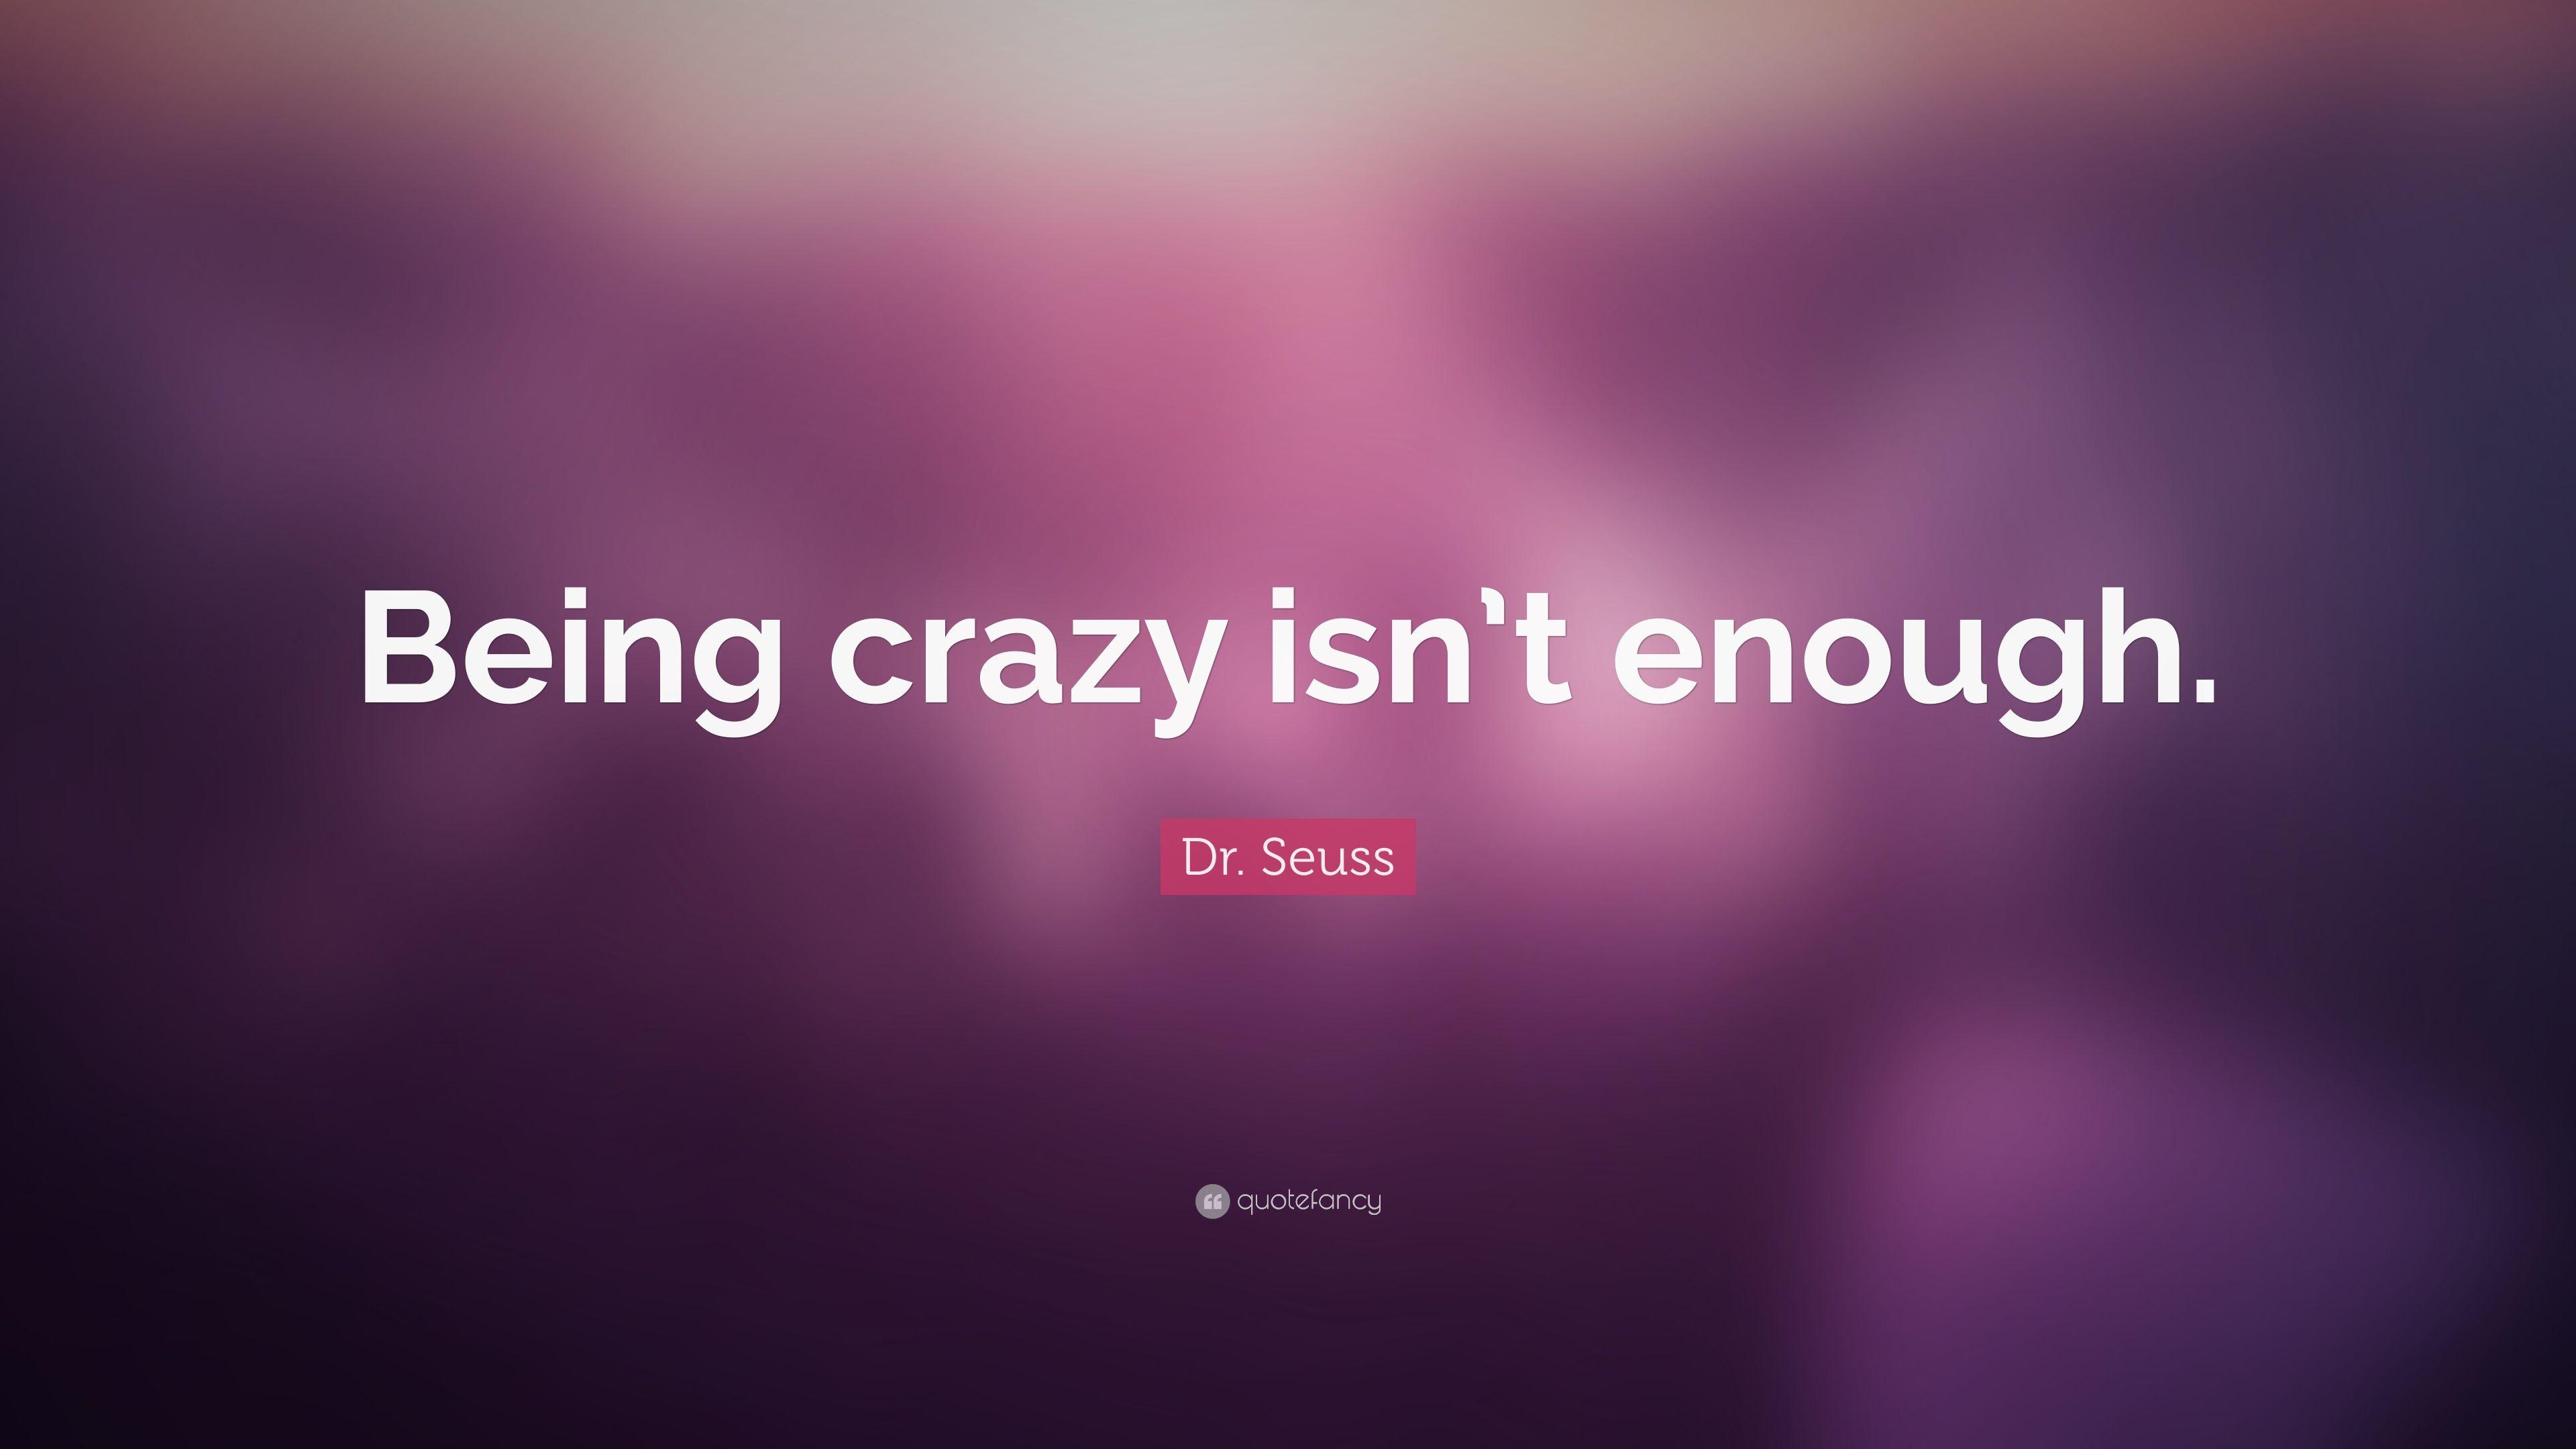 Dr. Seuss Quote: “Being crazy isn't enough.” 11 wallpaper